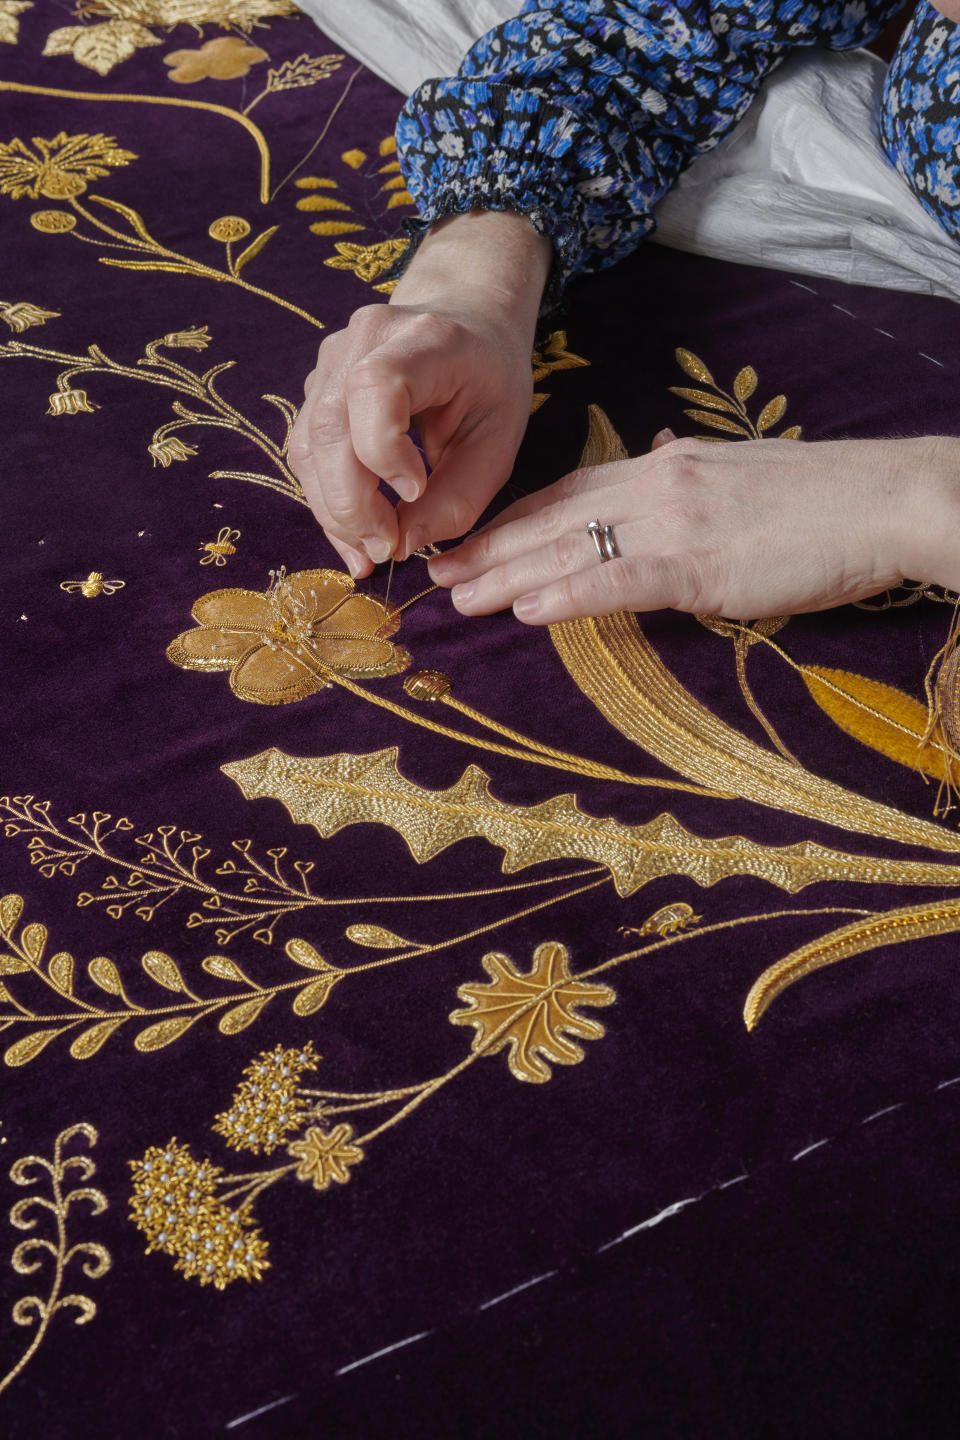 Sewer at the Royal School of Needlework working on the Queen Consort’s new Robe of Estate (PA)